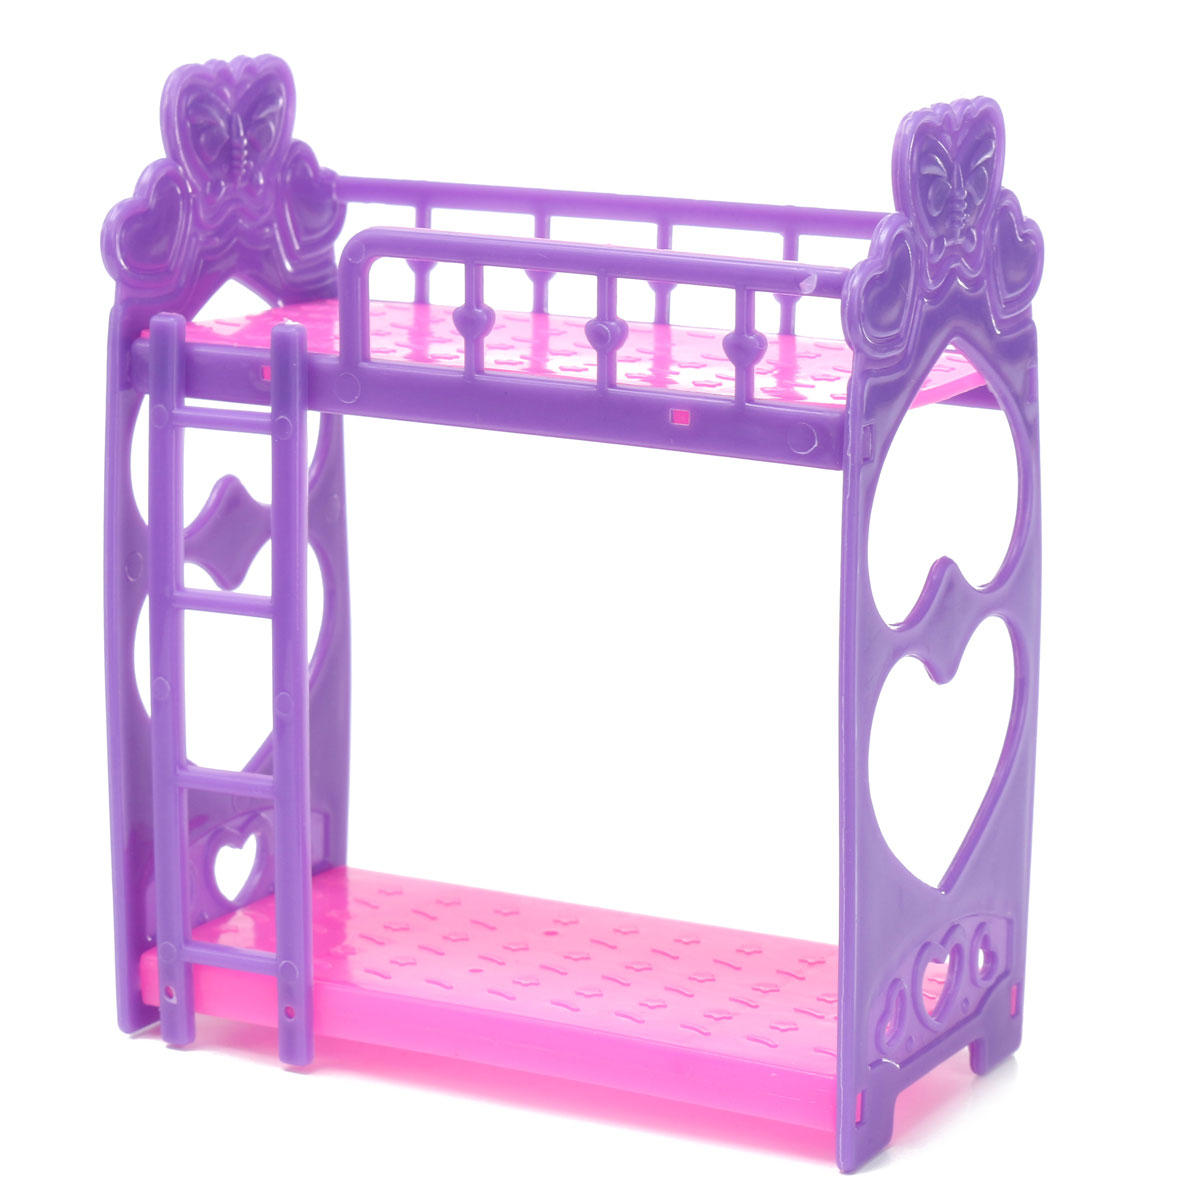 Miniature Double Bed Toy Furniture For Dollhouse Decoration